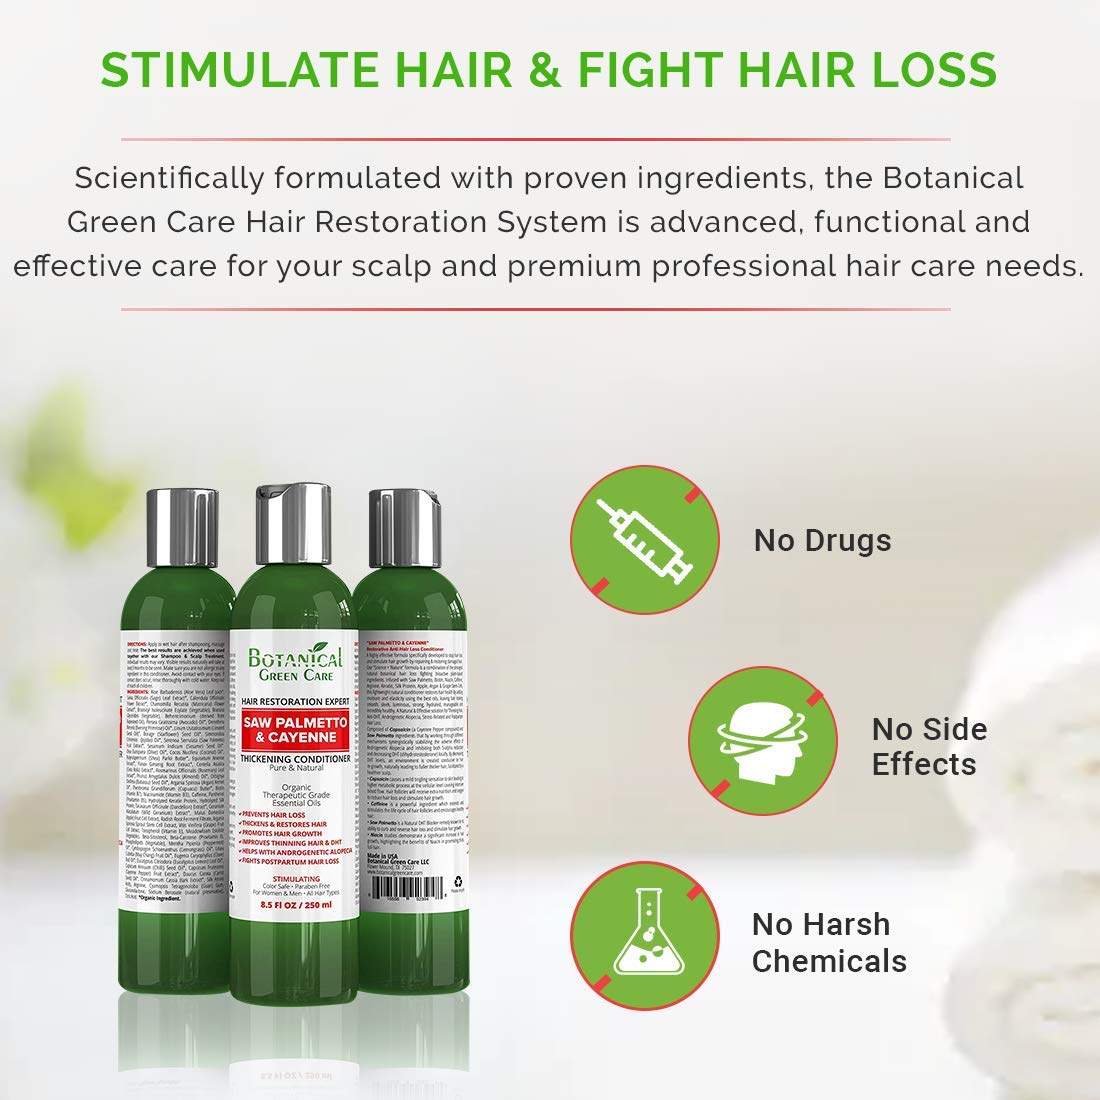 "Saw Palmetto & Cayenne" Hair Growth Anti-Hair Loss CONDITIONER. Alopecia Prevention and DHT Blocker. Doctor Developed